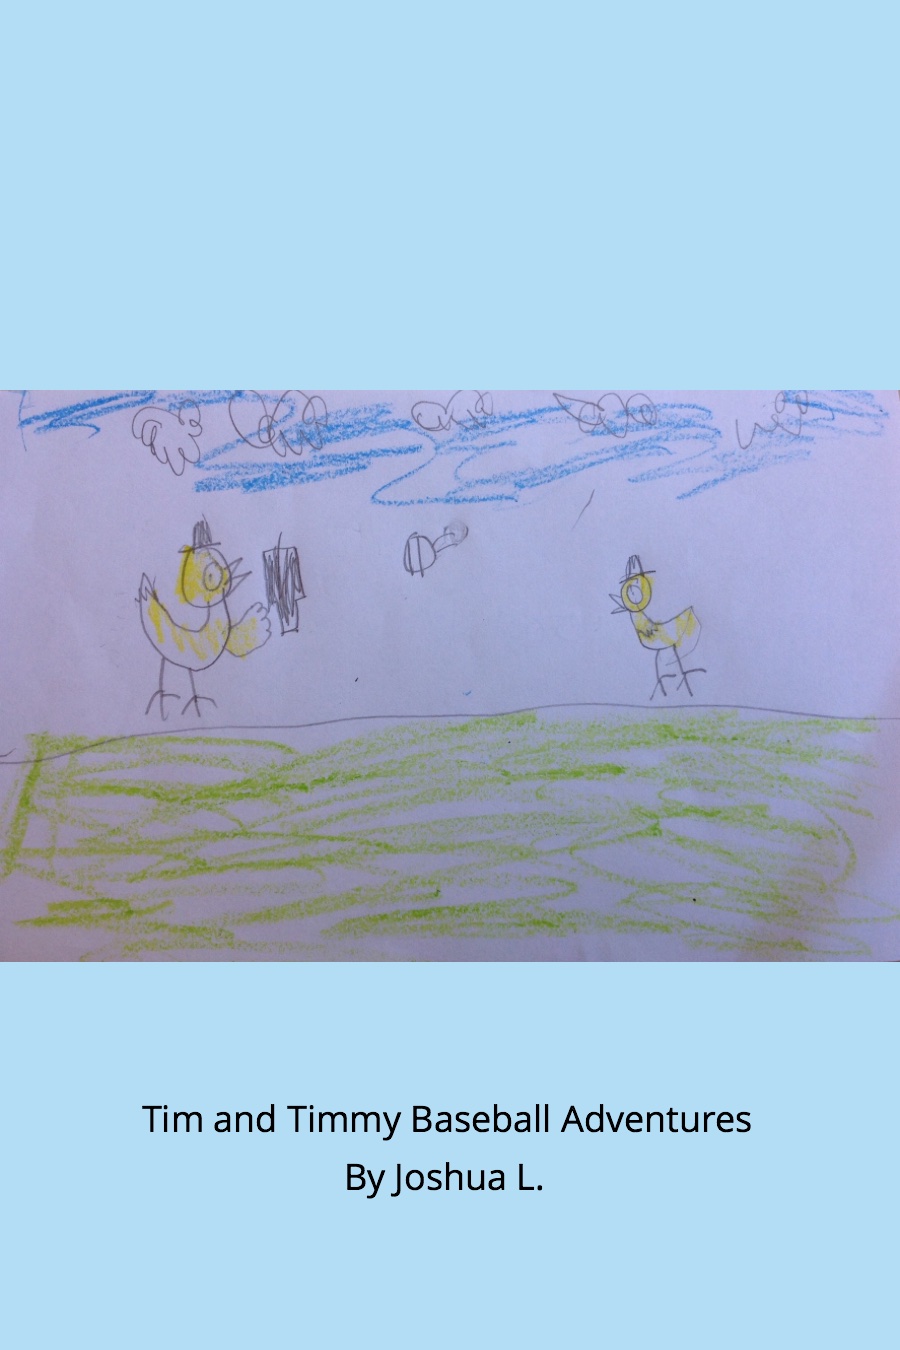 Tim and Timmy Baseball Adventures by Joshua L